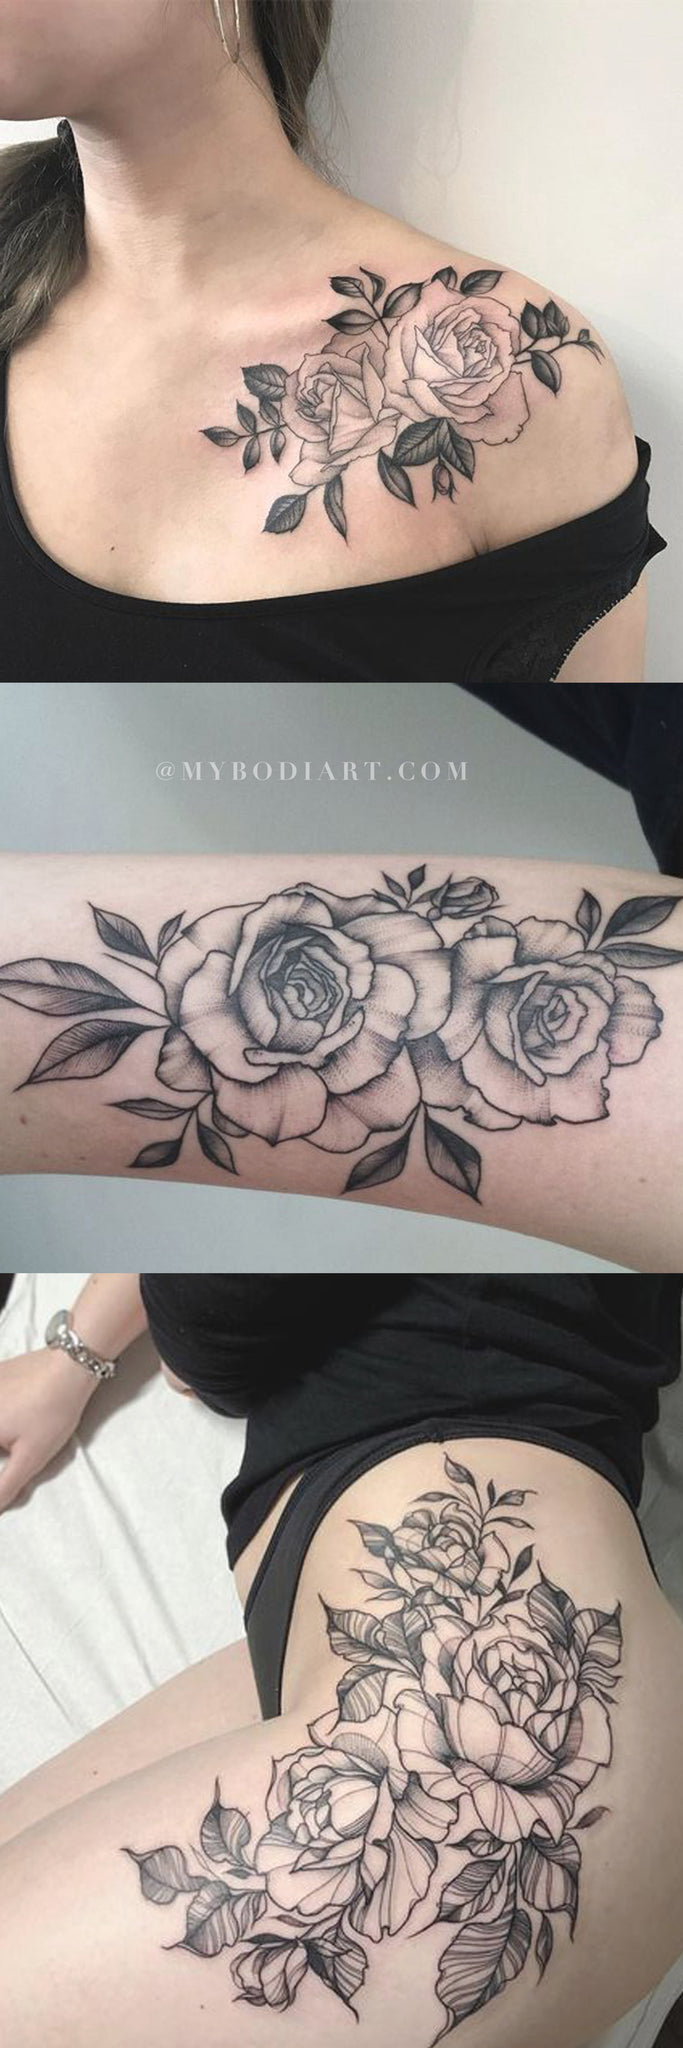 Traditional Trendy Rose Tattoo Ideas for Women - Floral Flower Outline Shoulder Thigh Arm Tattoos - www.MyBodiArt.com